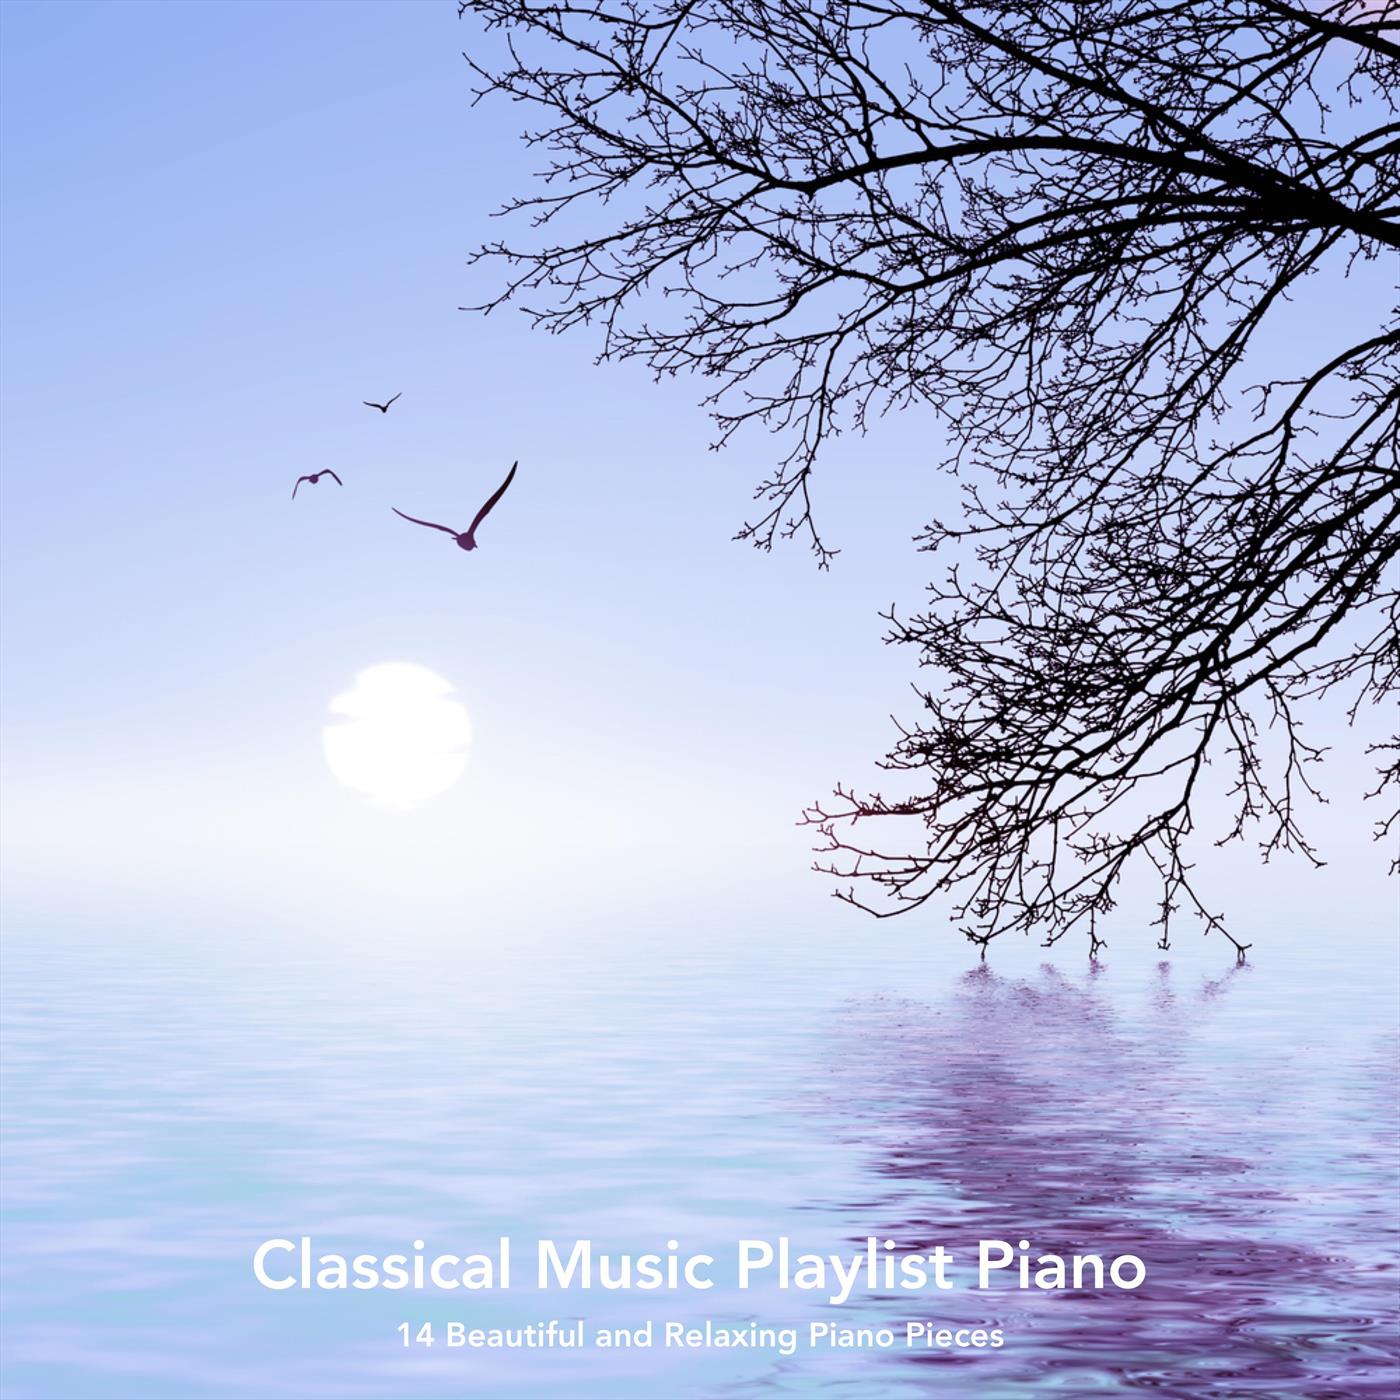 Classical Music Playlist Piano: 14 Beautiful and Relaxing Piano Pieces